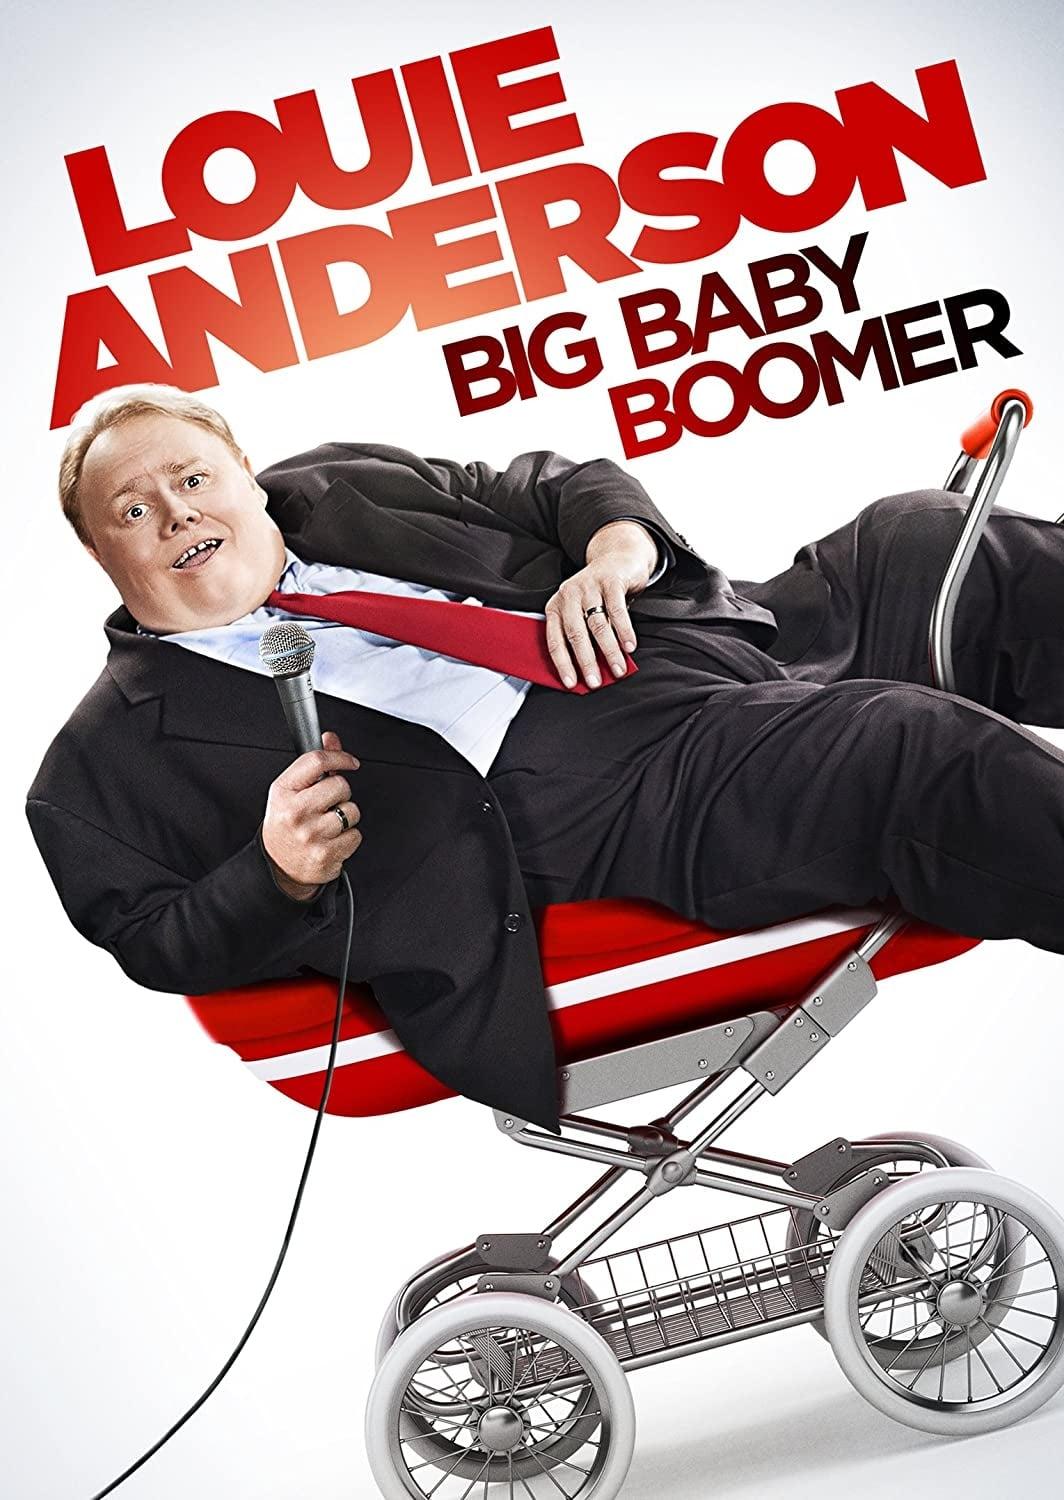 Louie Anderson: Big Baby Boomer poster